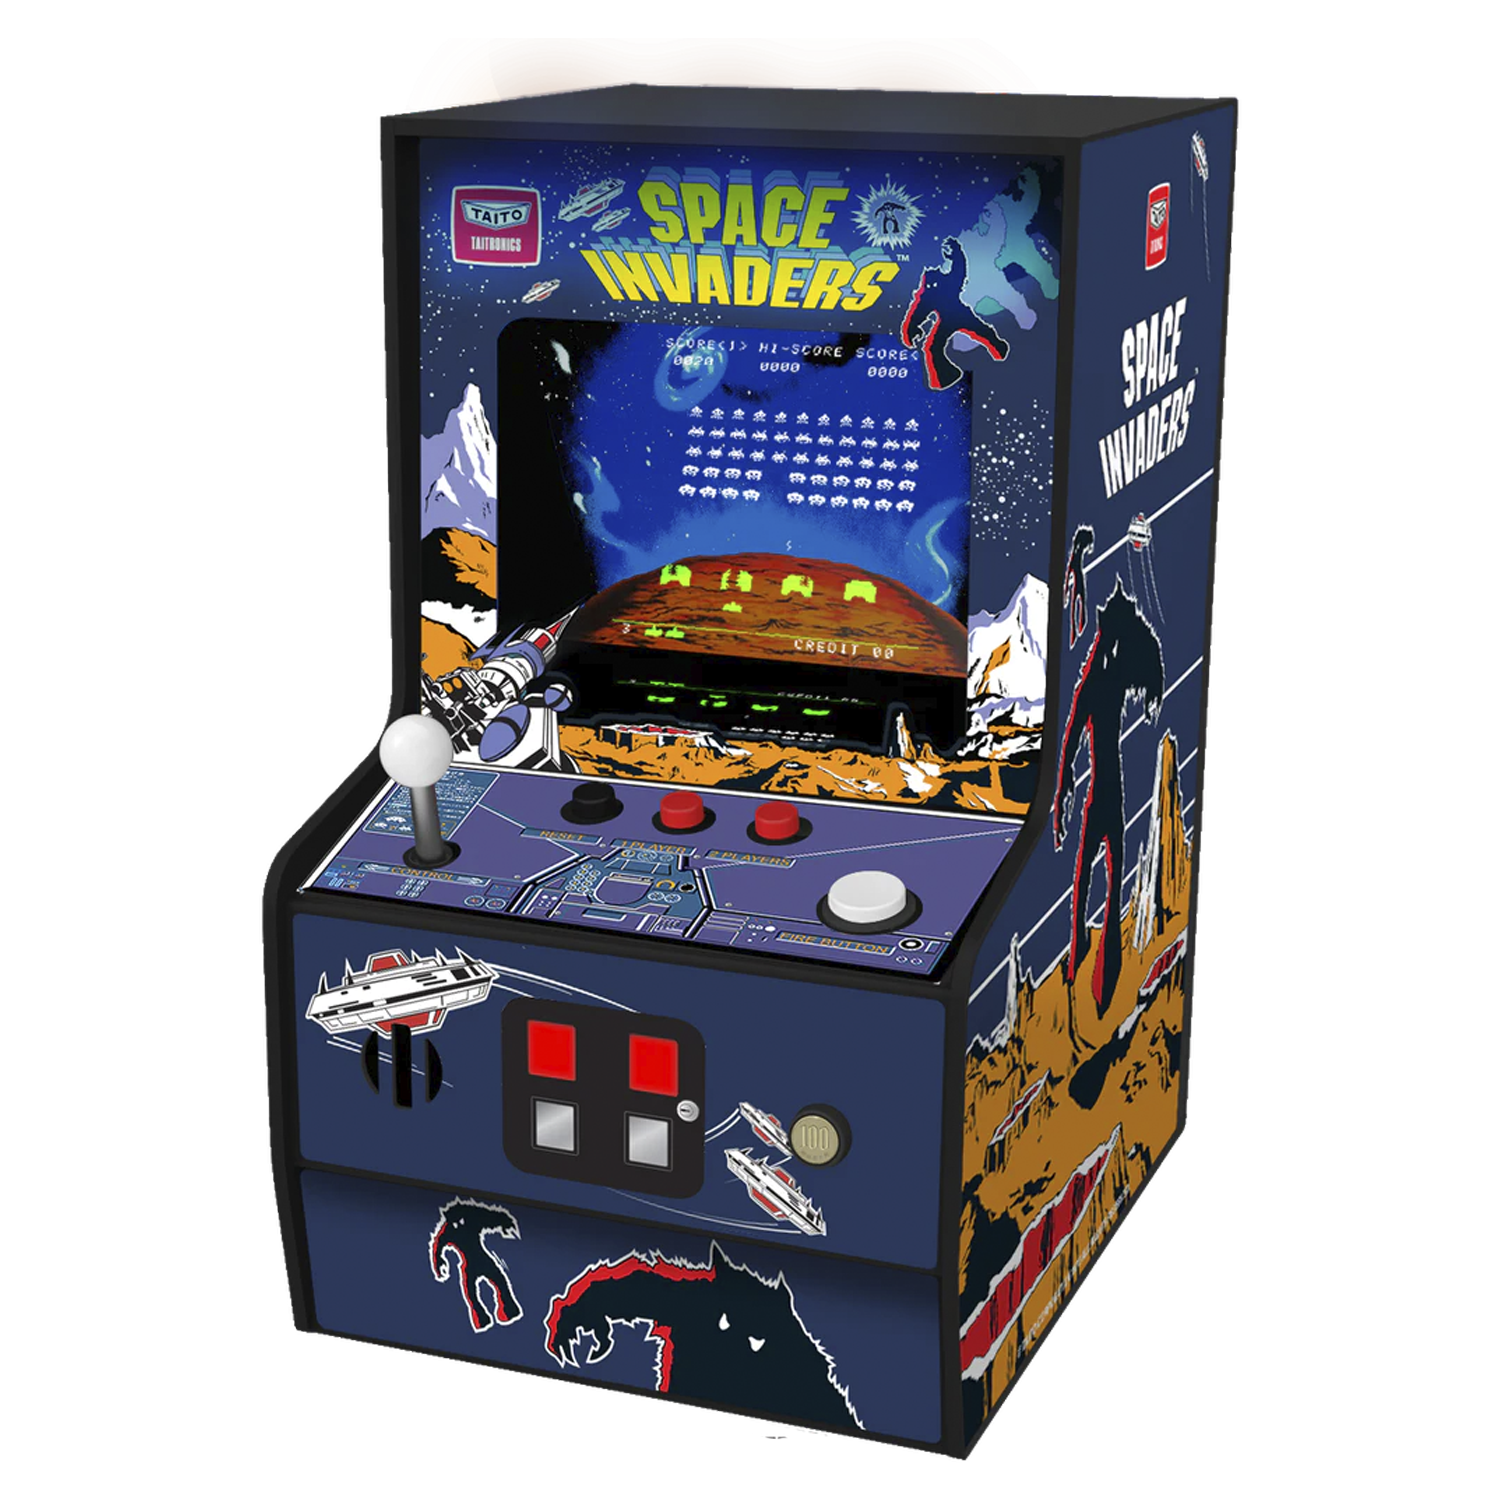 Console Dreamgear My Arcade Space Invaders Micro Player DGUNL-3279